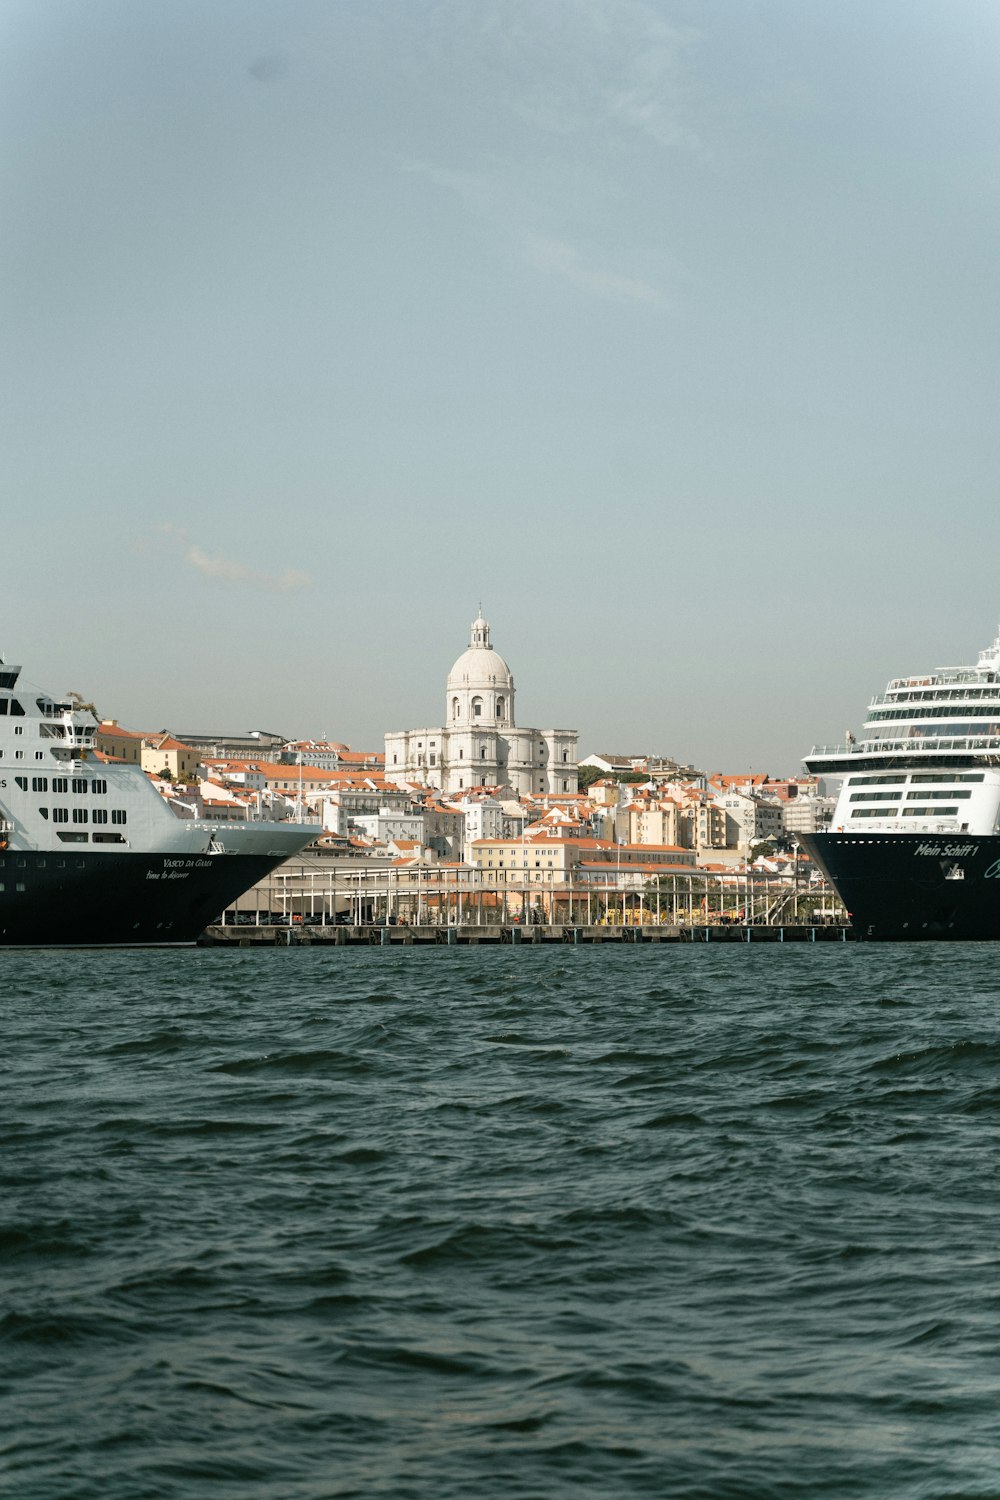 two cruise ships in the water near a city